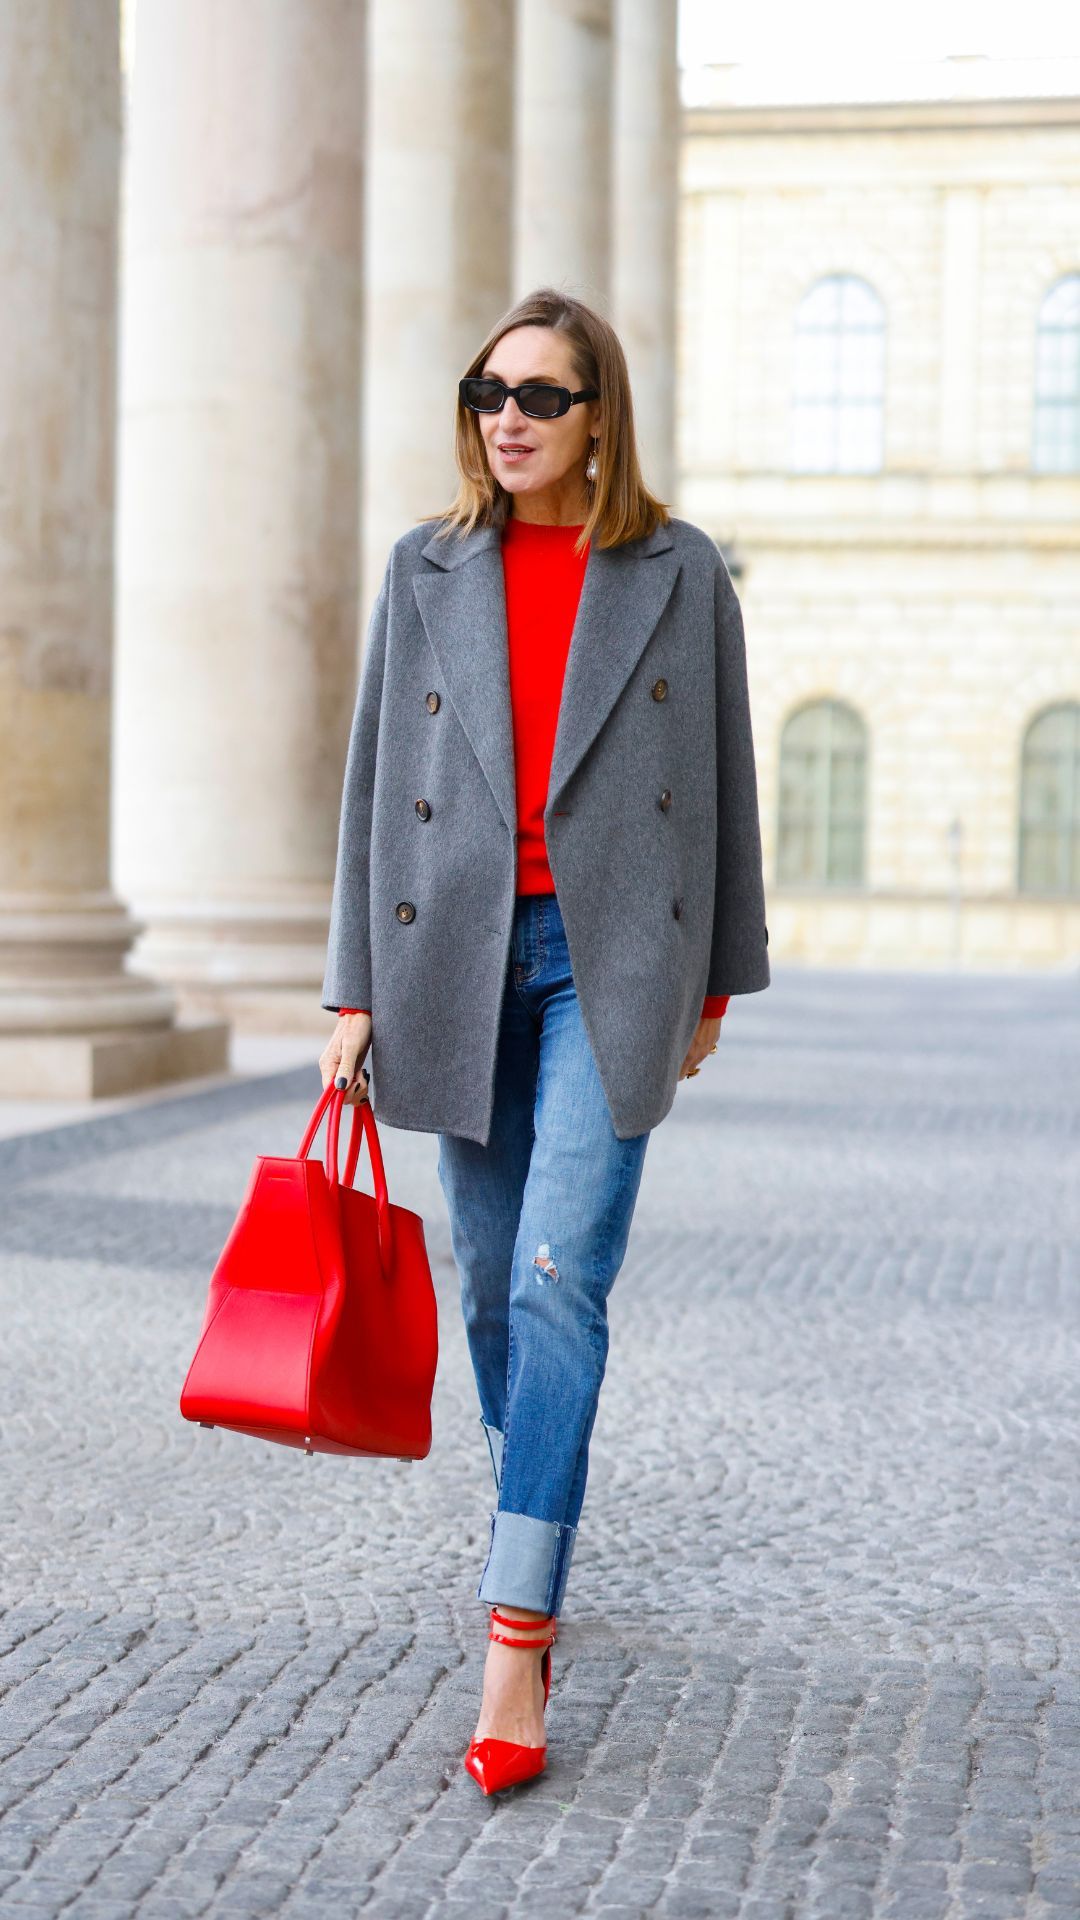 31 inspirational street style outfits for jeans wearers to help ...